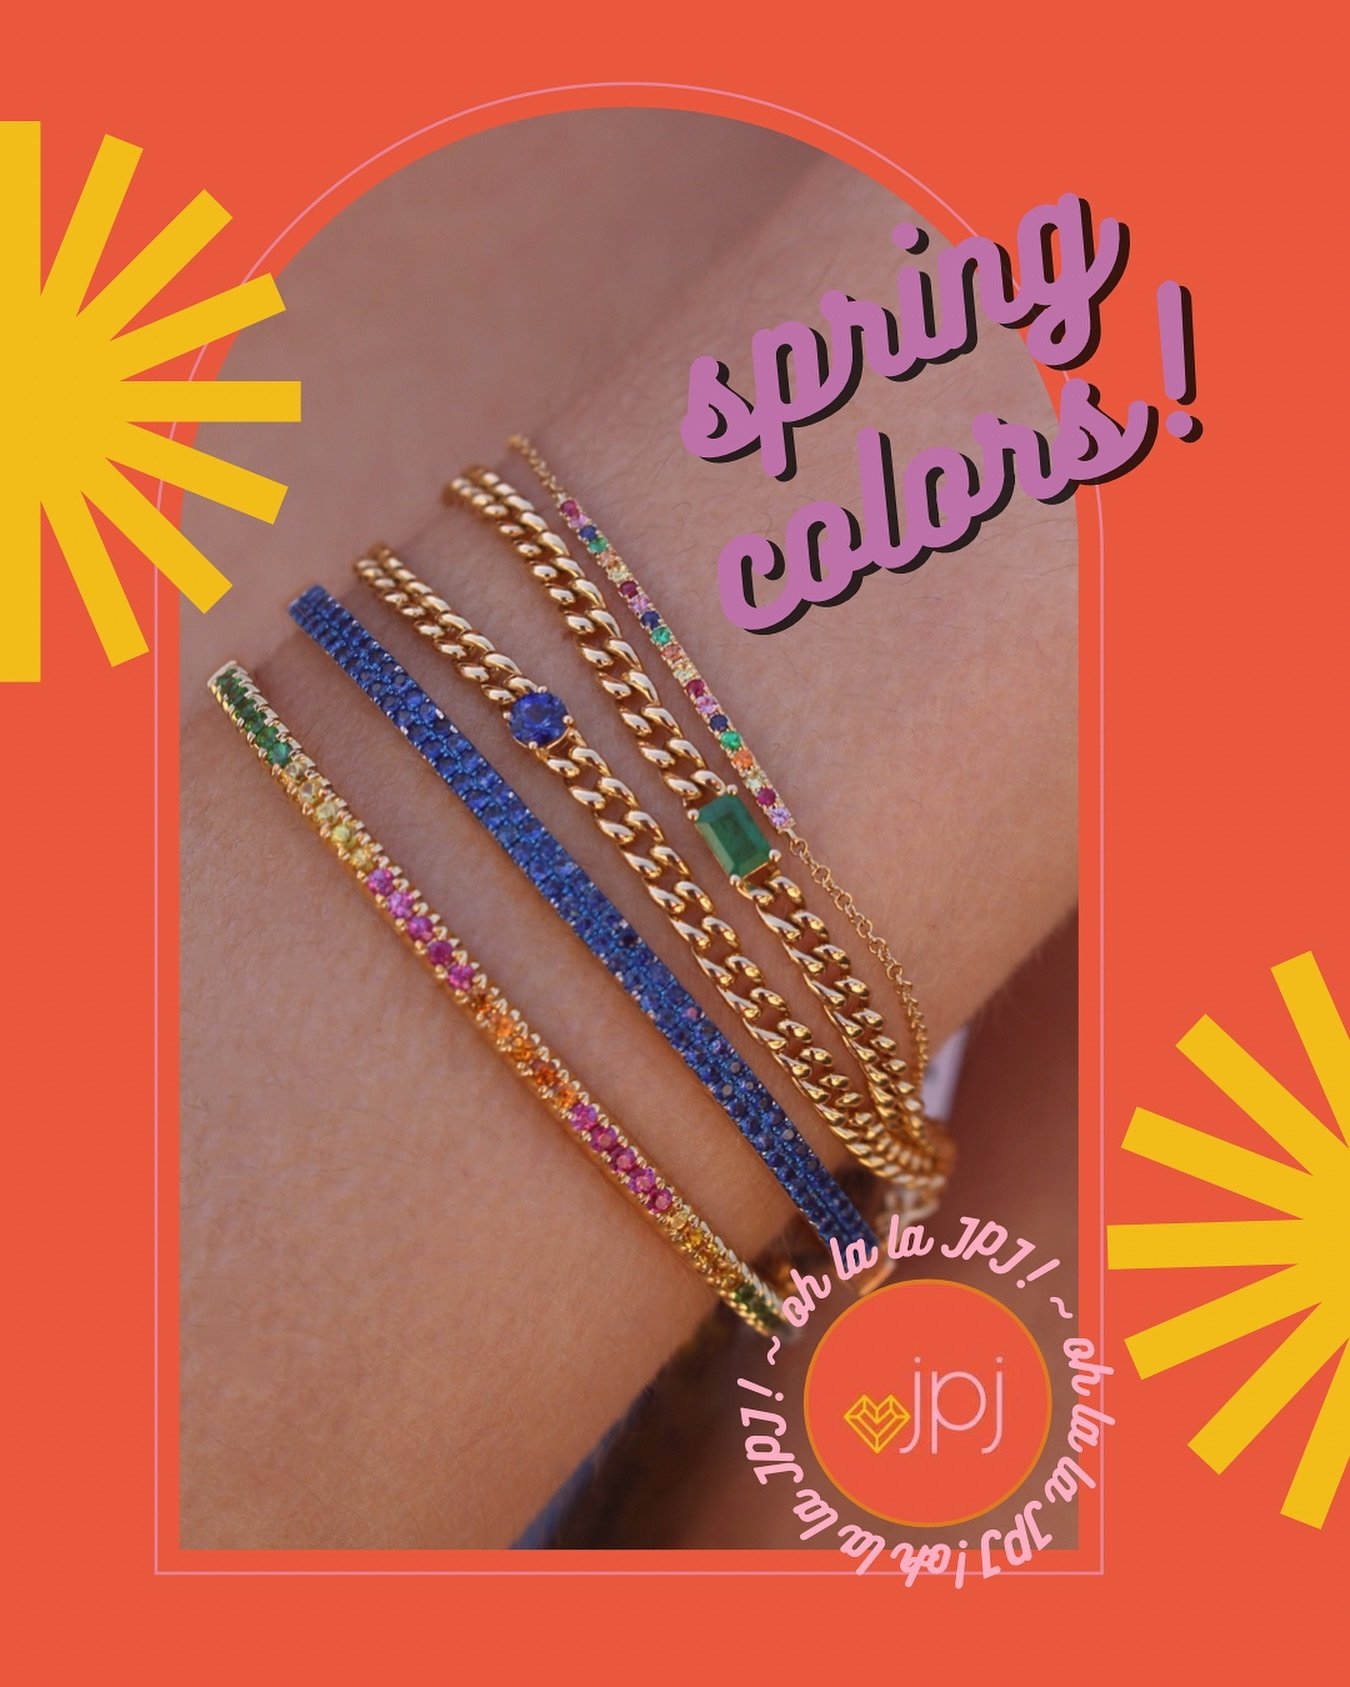 Brighten your day with some FUN colorful jewels! Mix classic styles with pops of blue, green, pink, orange, and yellow to create an eye catching combo! 
💕
#colorful #rainbow #spring #finejewelry #jewelry #womenownedbusiness #mothersday #bracelet